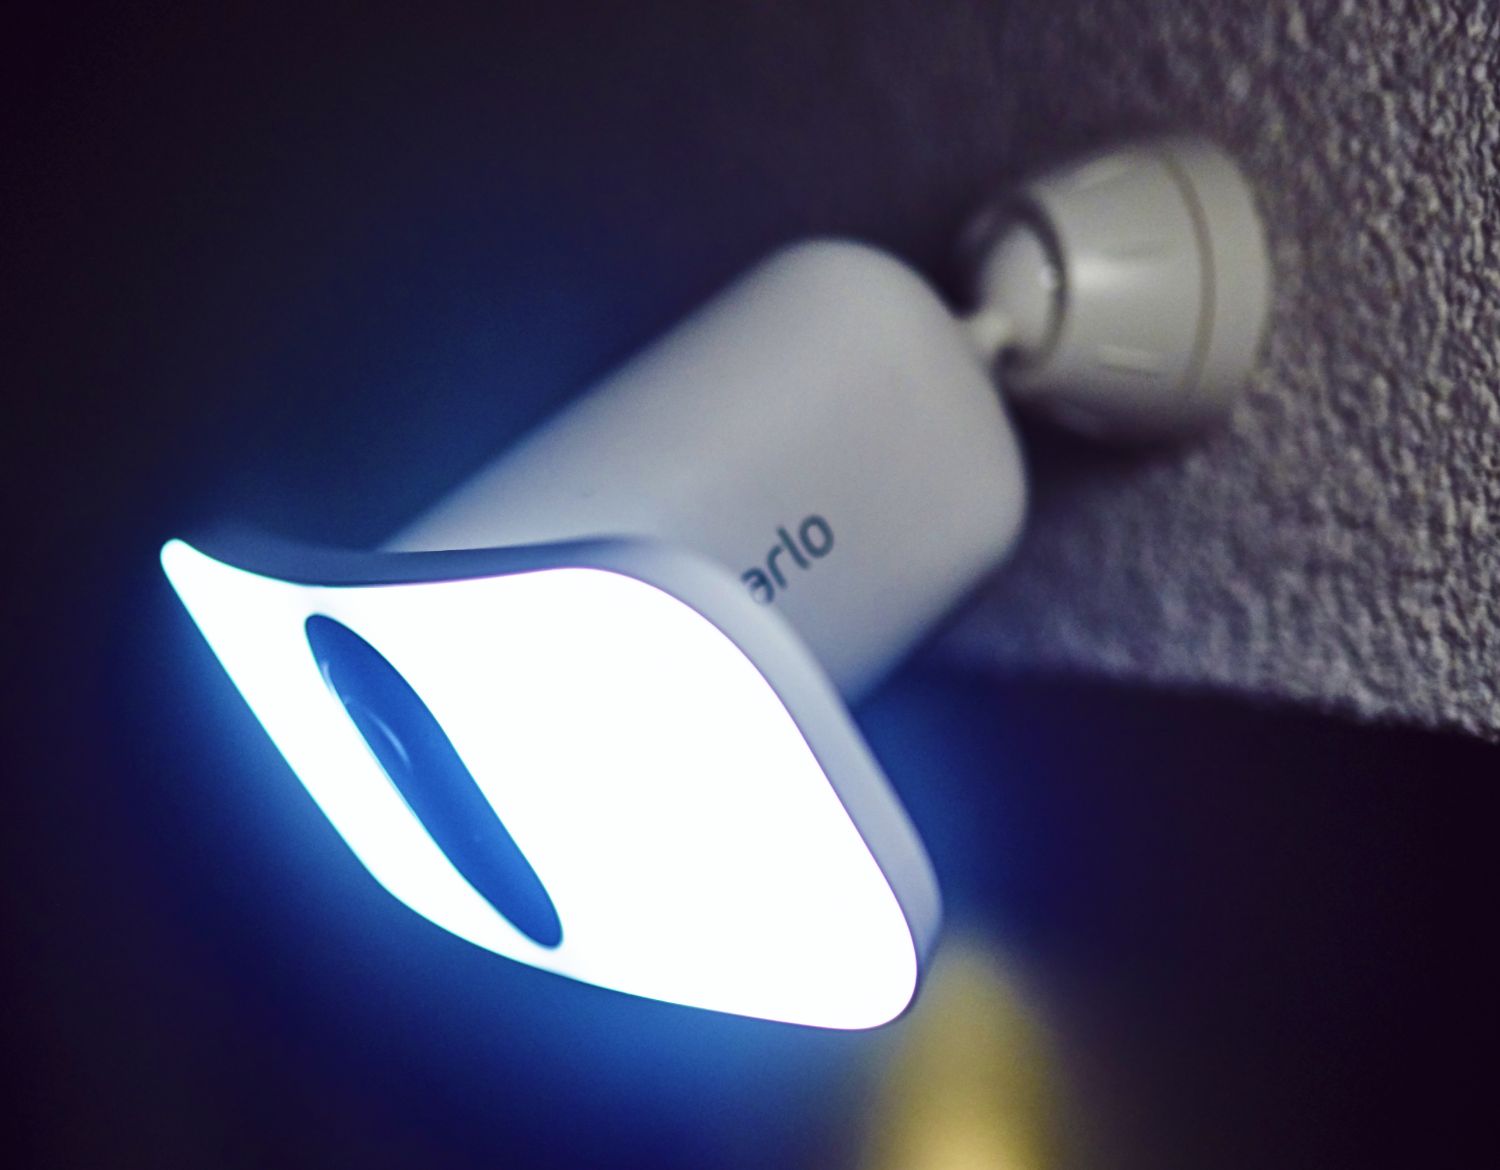 An Arlo Floodlight camera illuminates your property with 3000 lumen light that's brighter than a car headlight